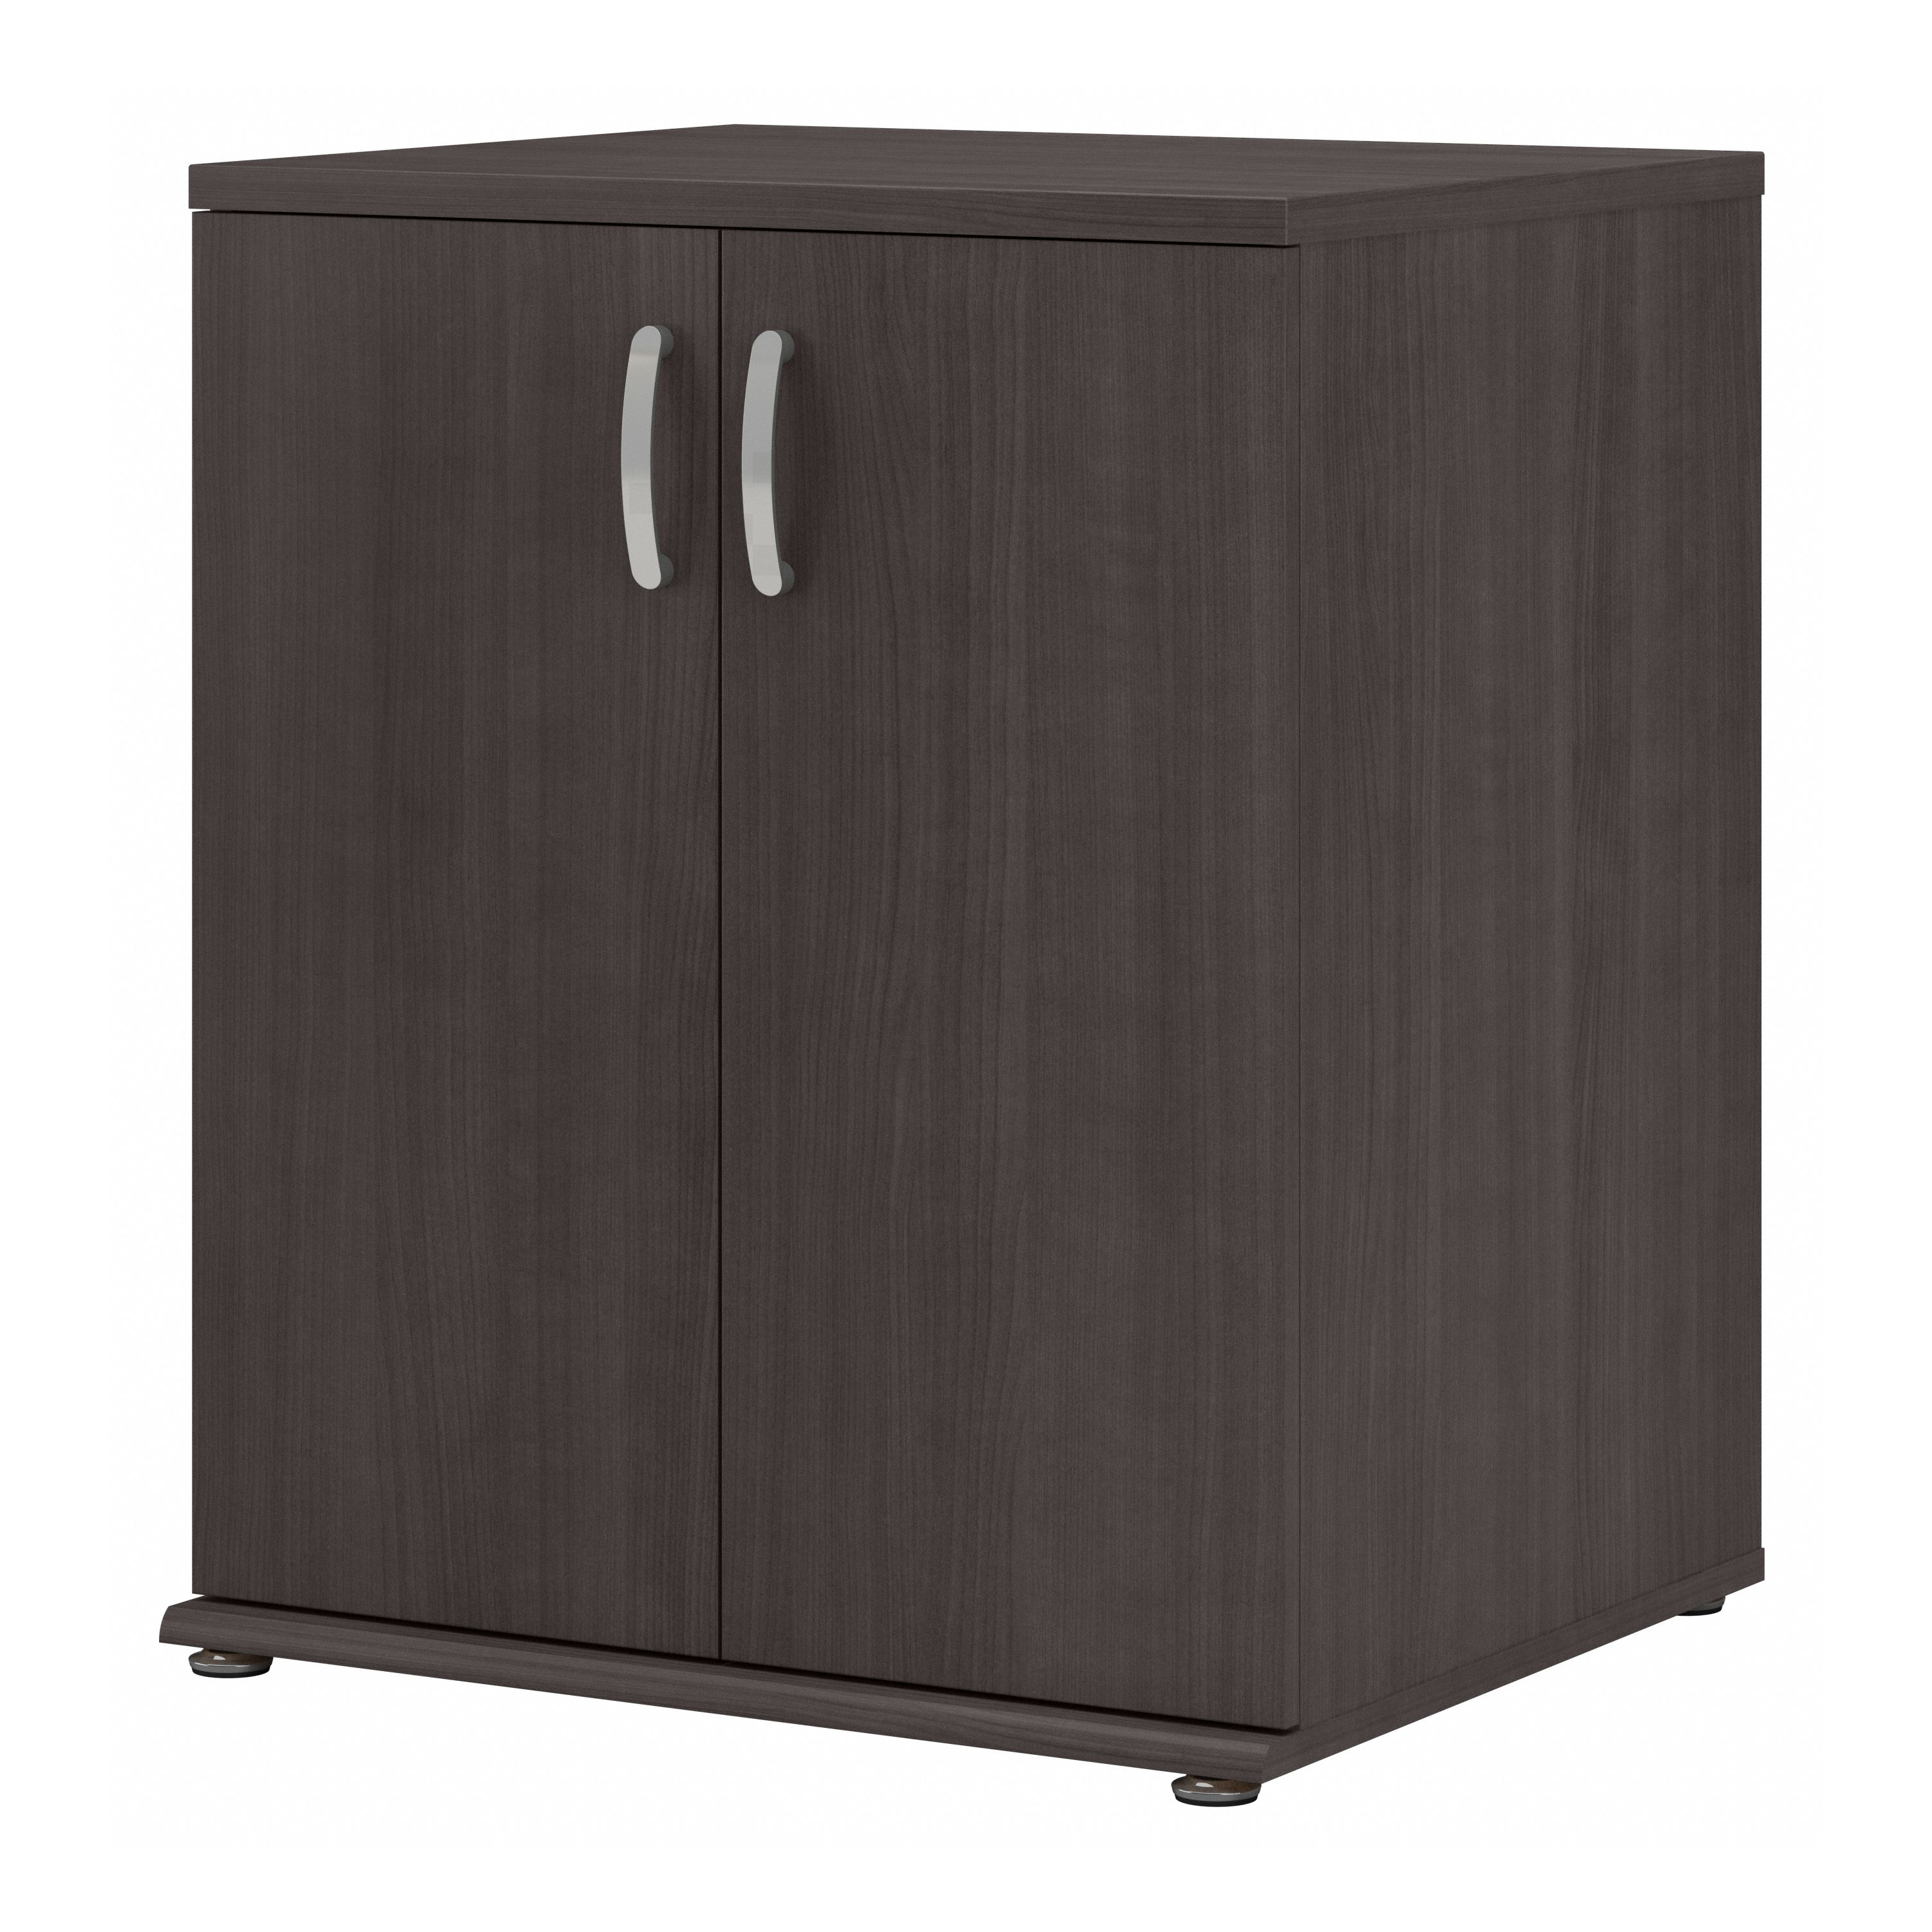 Shop Bush Business Furniture Universal Floor Storage Cabinet with Doors and Shelves 02 UNS128SG #color_storm gray